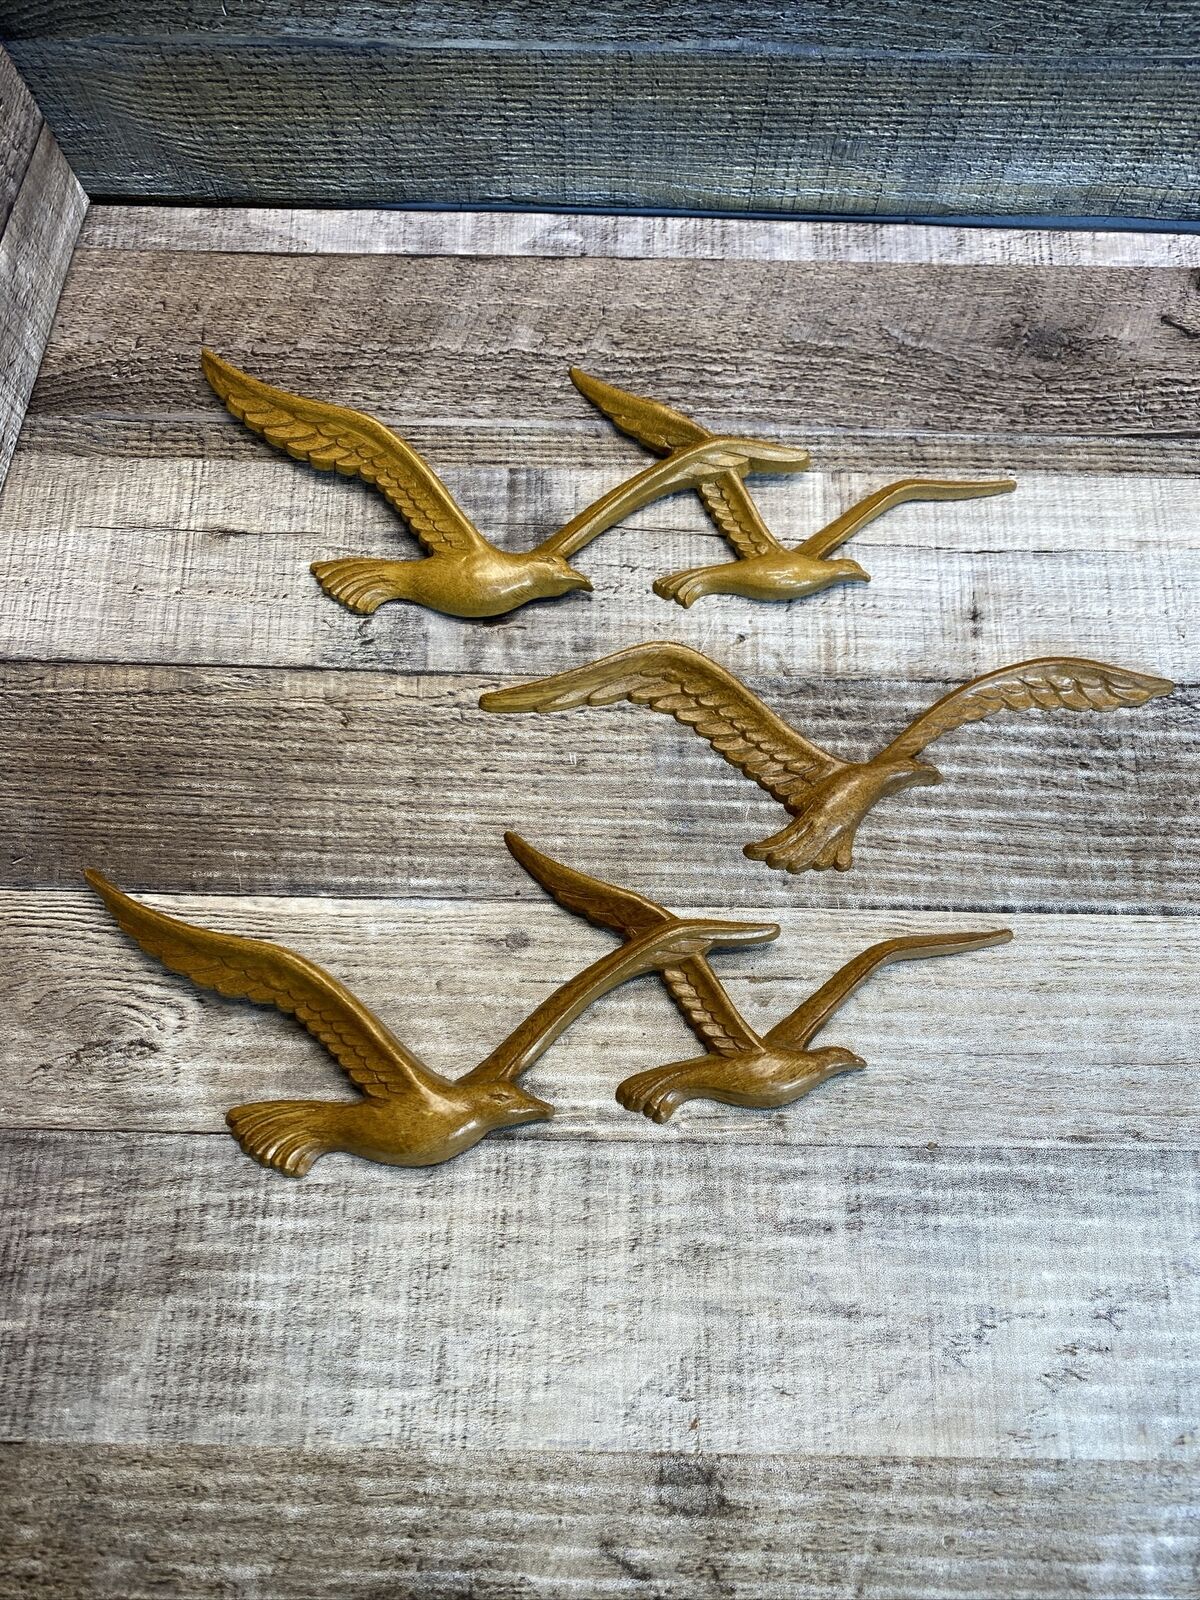 Vintage HOMCO Syroco Plastic Seagulls Faux Wood Wall Art Flying Birds 3 Pieces